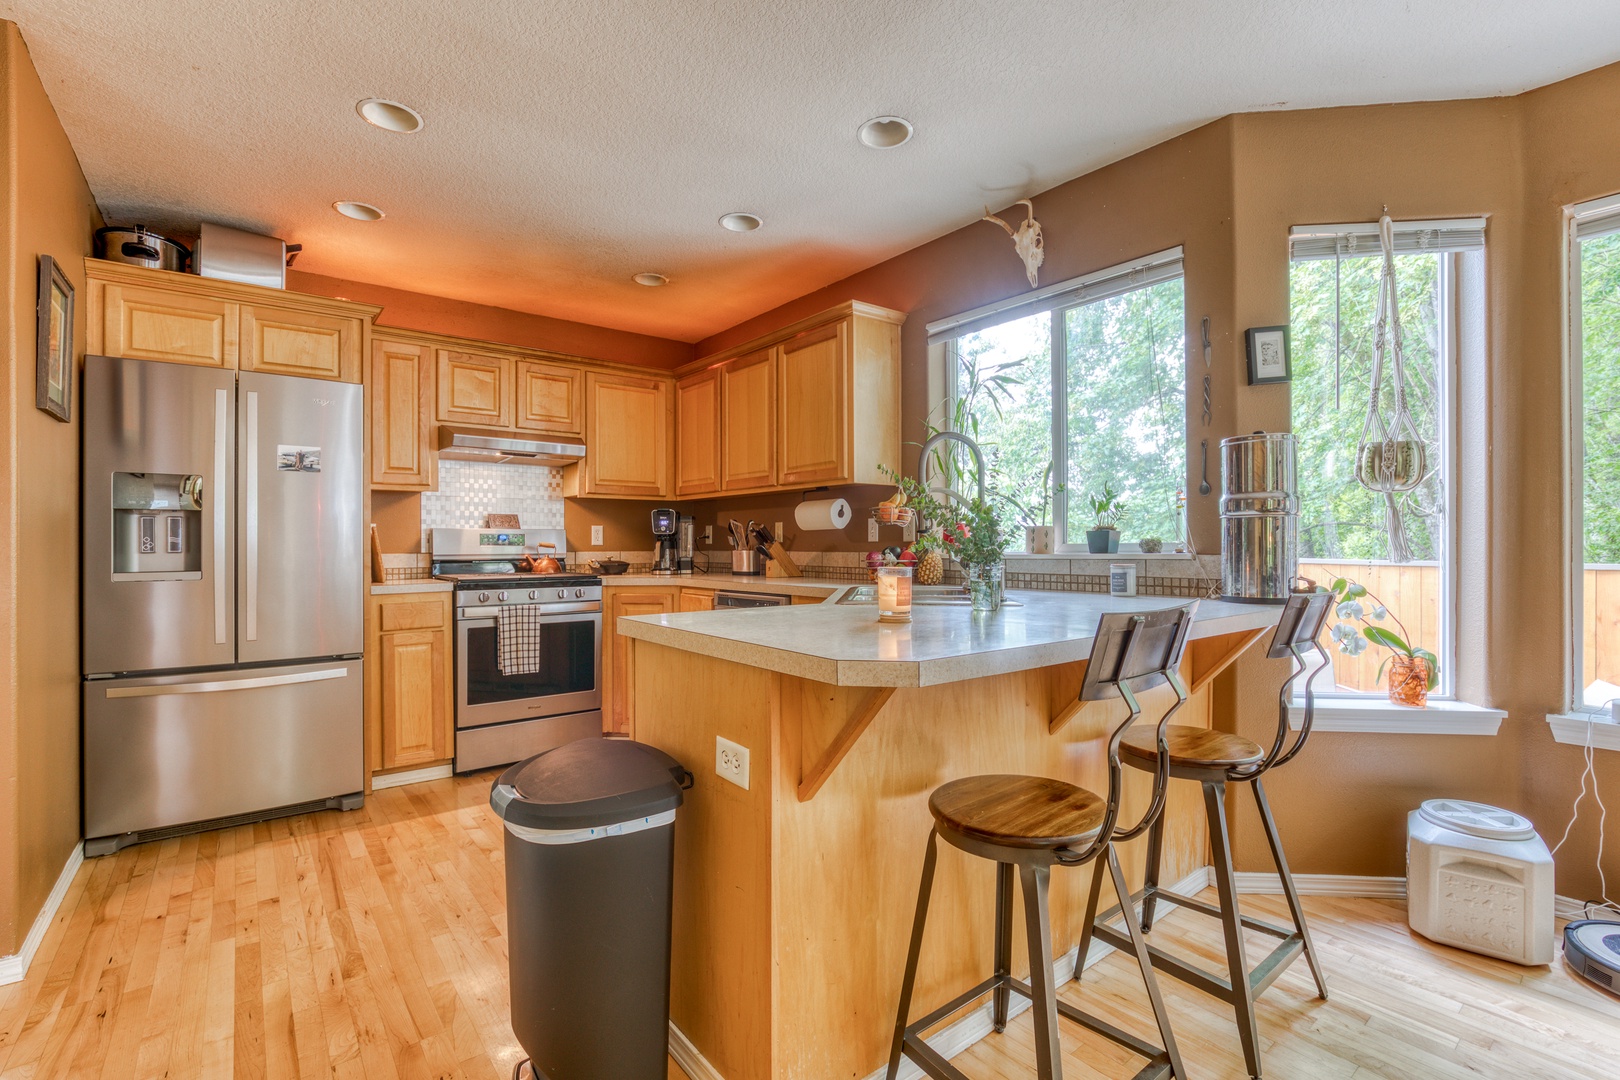 Clackamas Vacation Rentals, Duck Crossing - Enjoy the most important meal of the day or your morning cup of coffee here